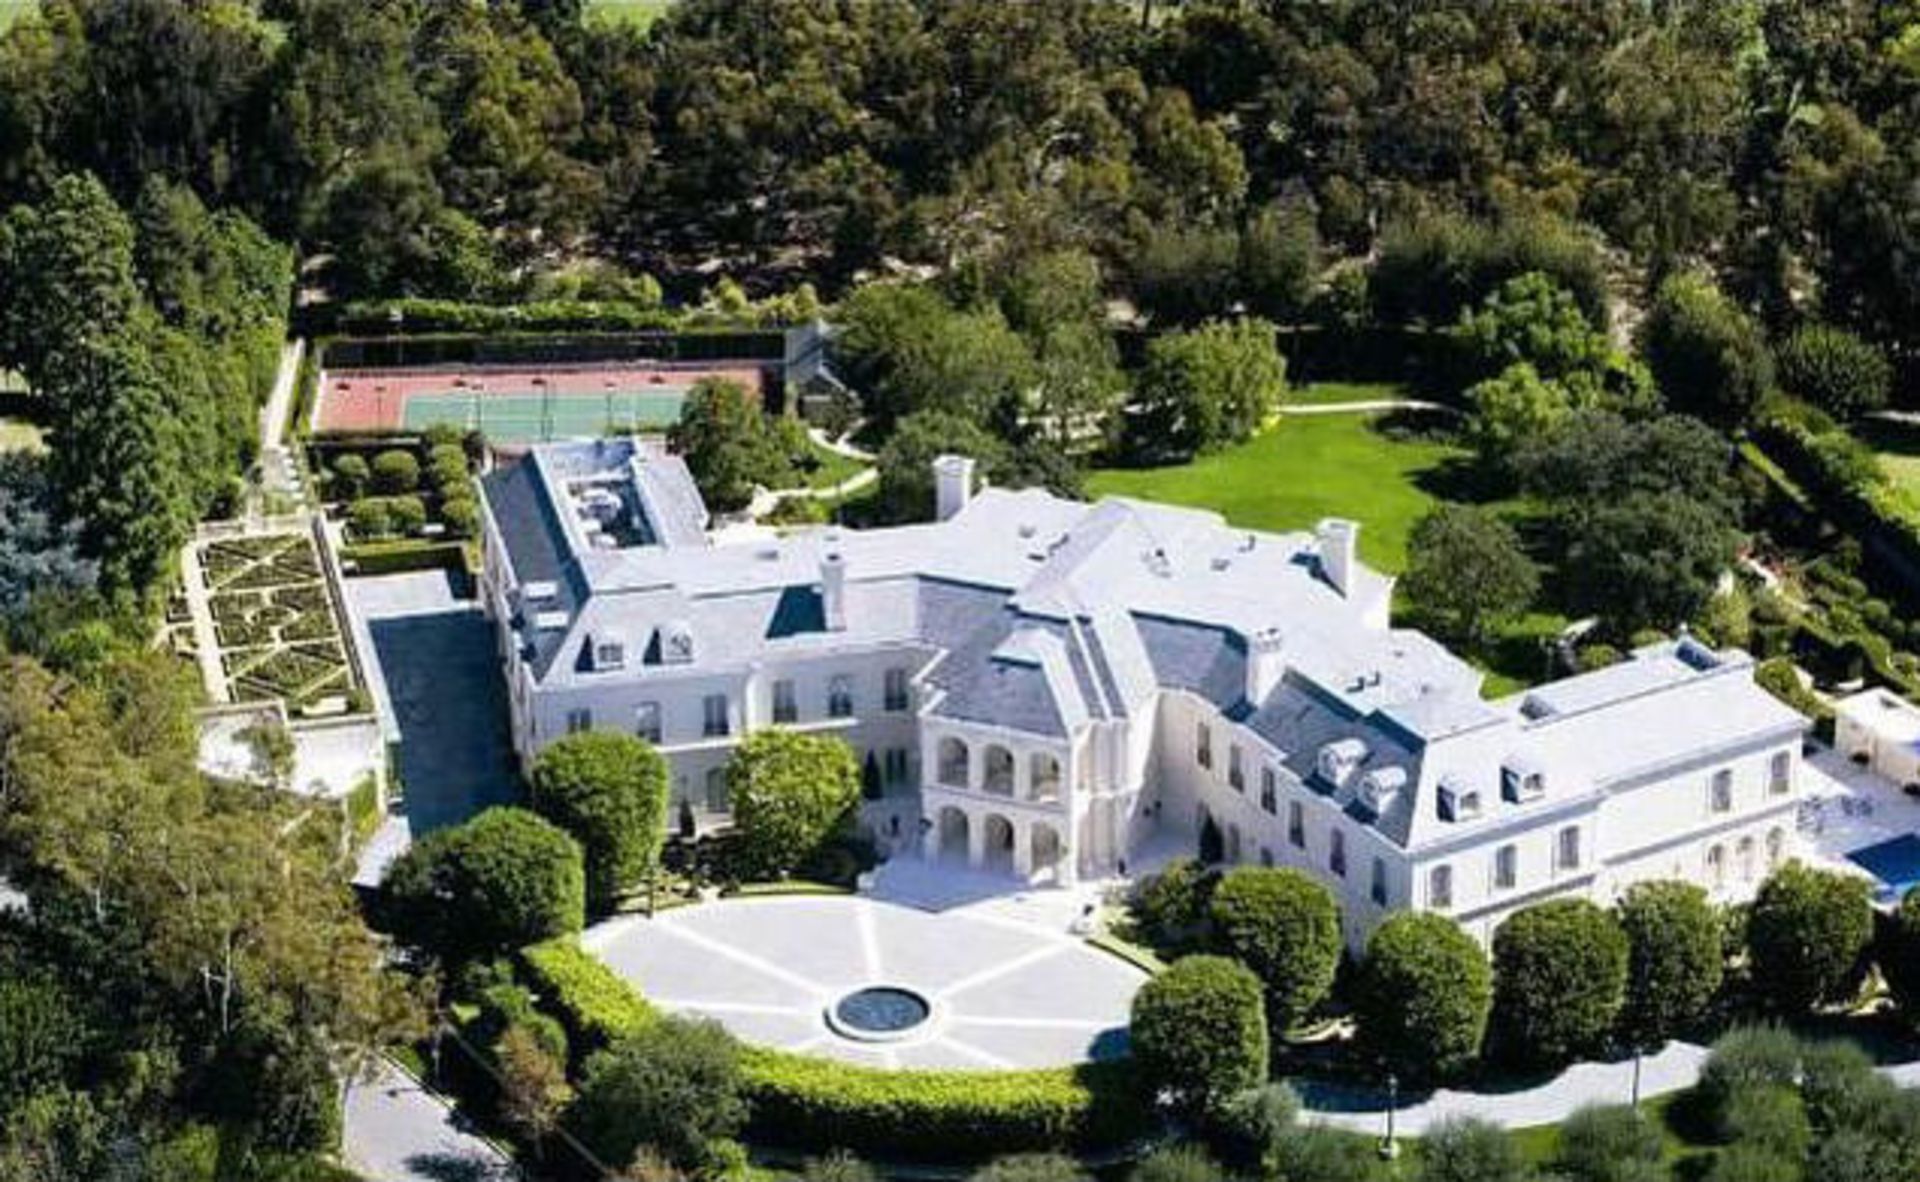 10-MOST-EXPENSIVE-HOMES-1